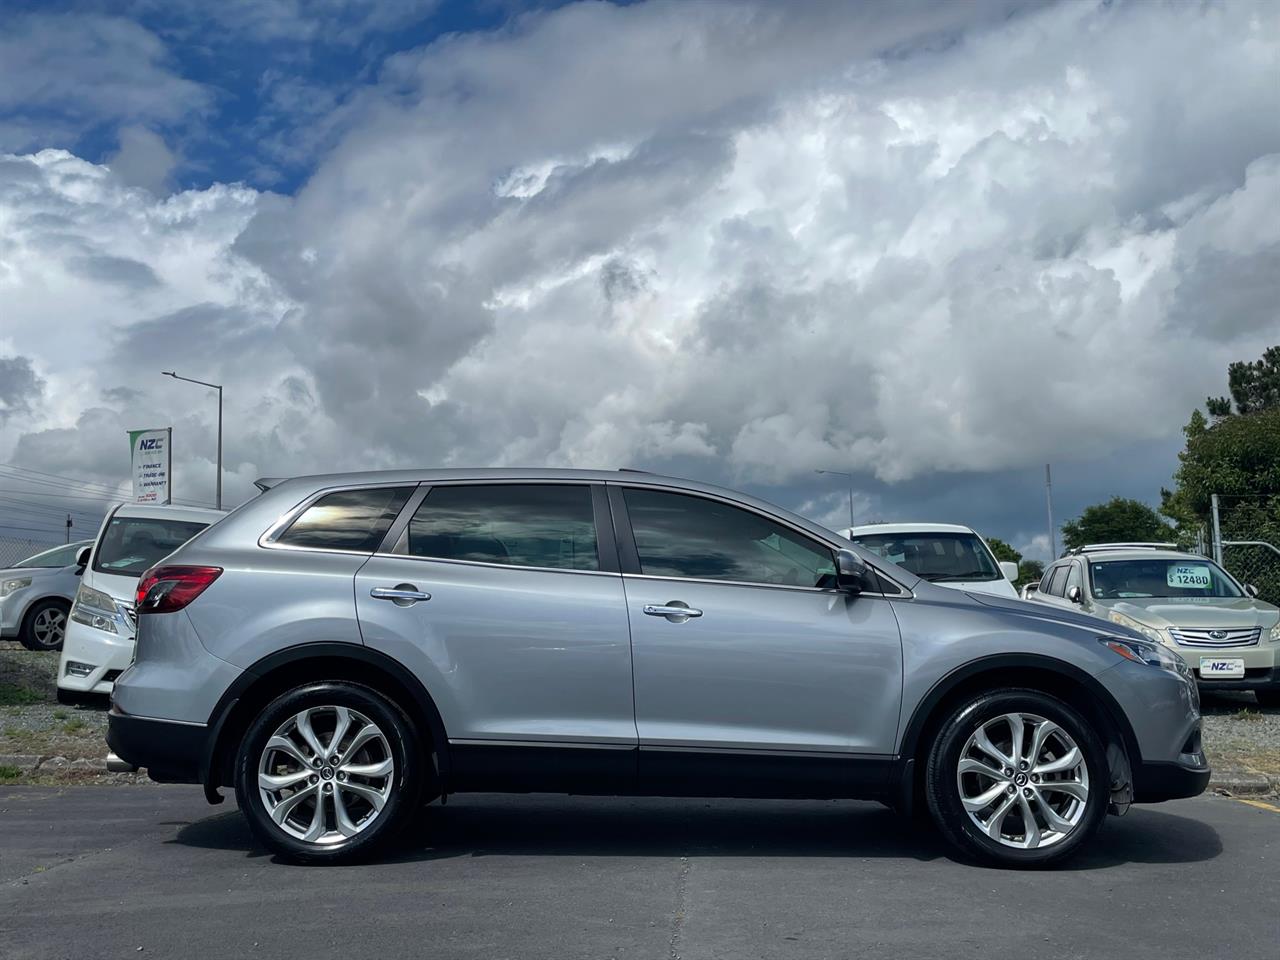 2013 Mazda CX-9 only $94 weekly